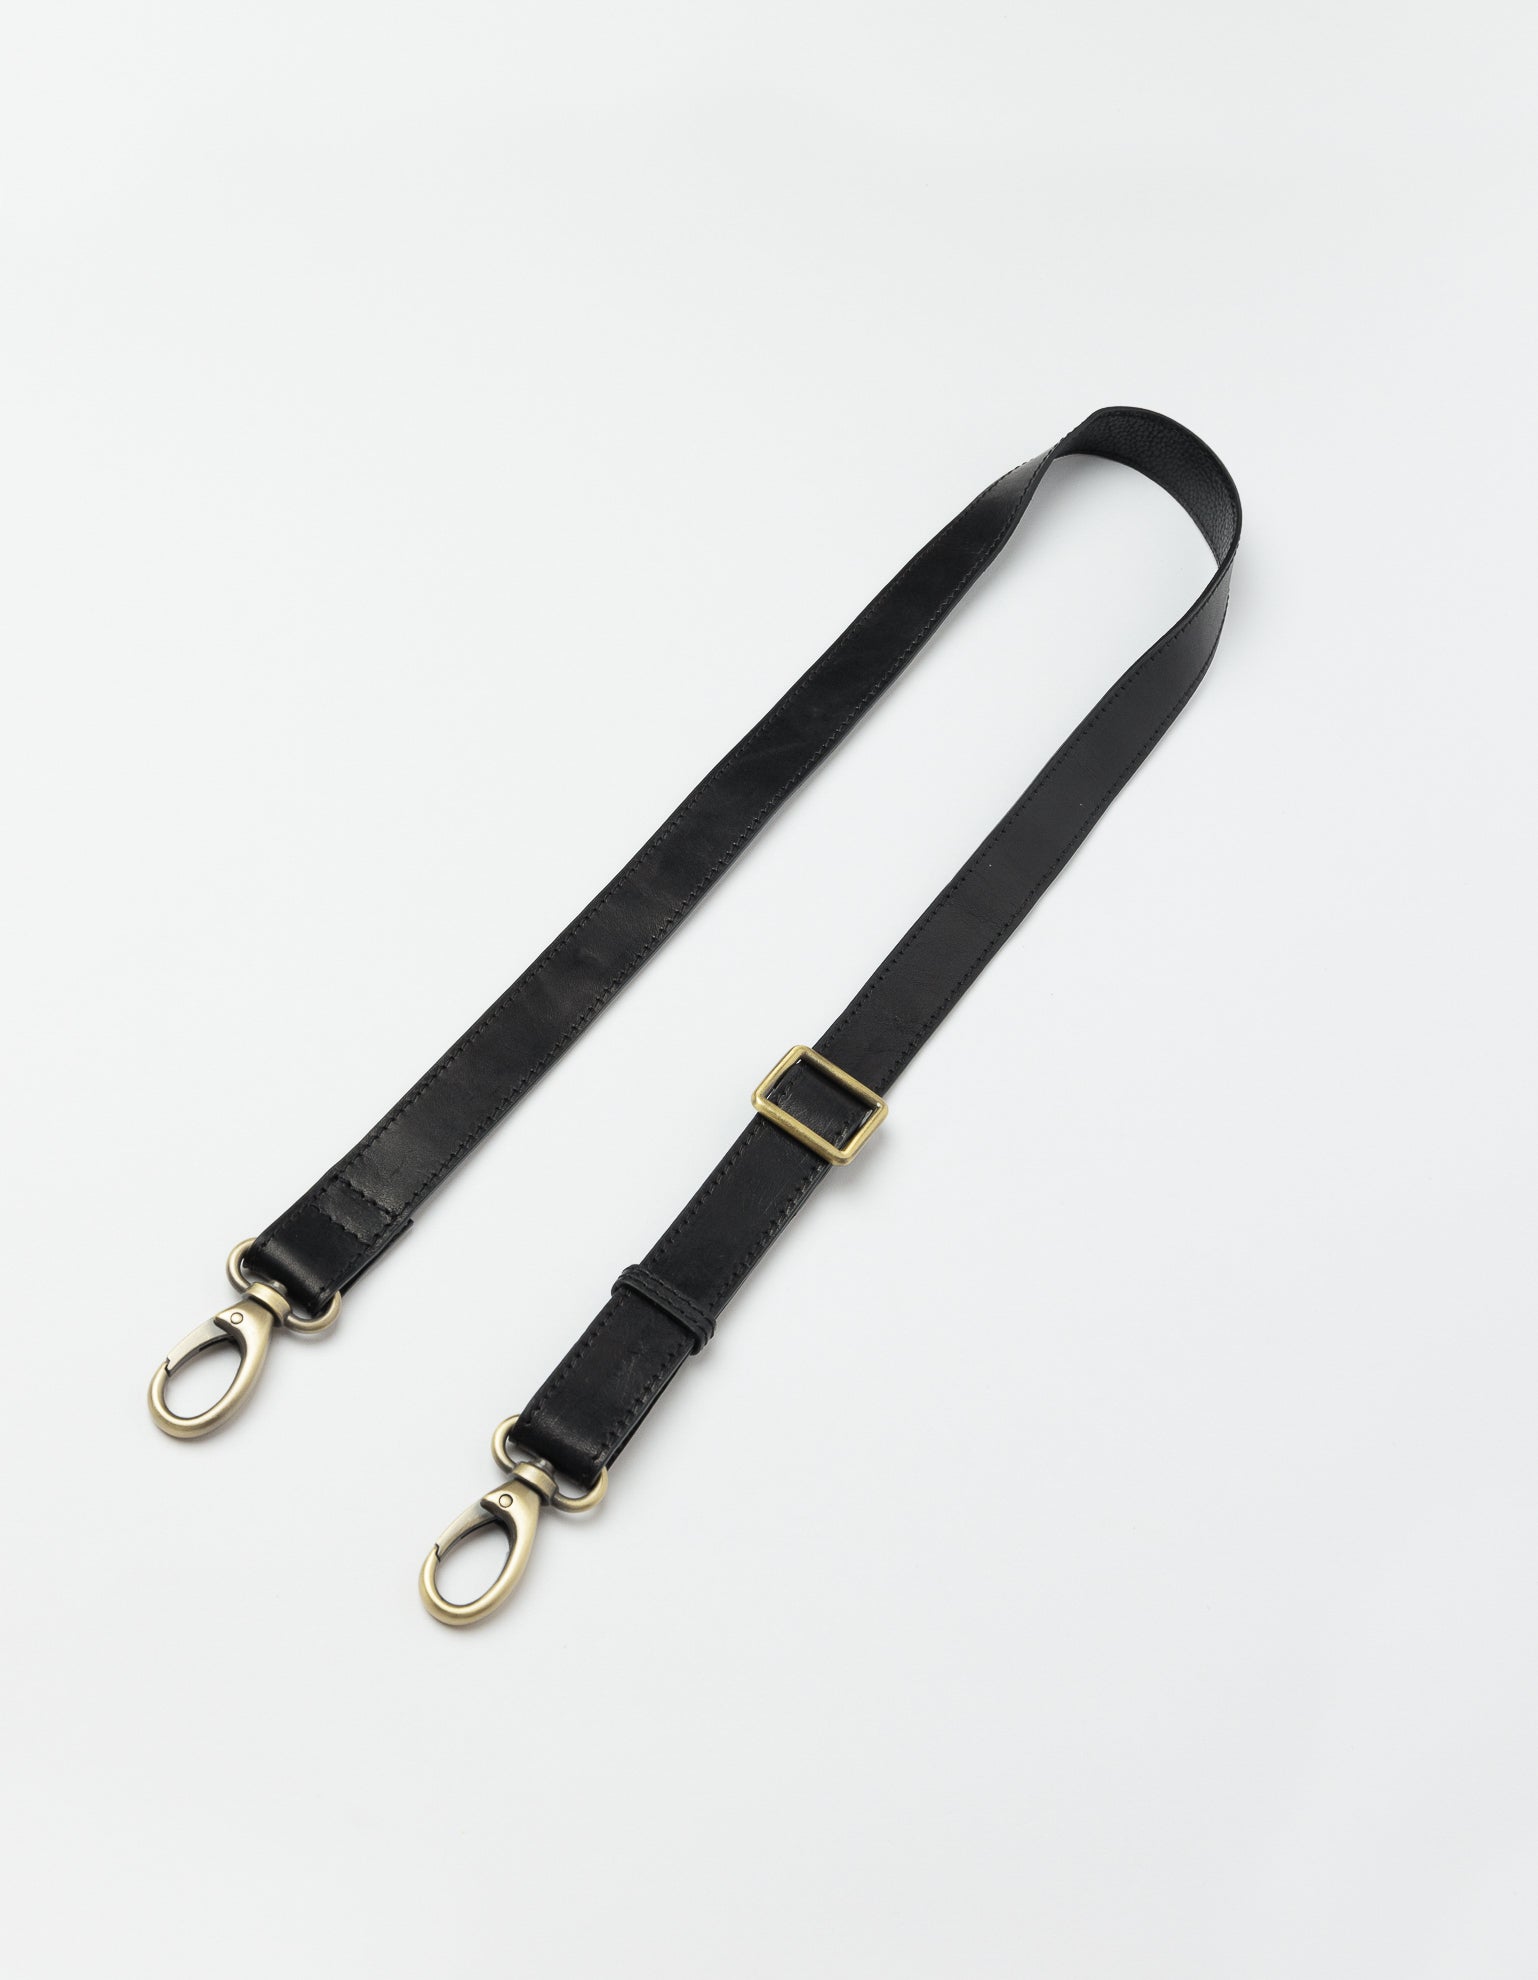 Bum Bag Strap in Black Stromboli Leather. Front product image.